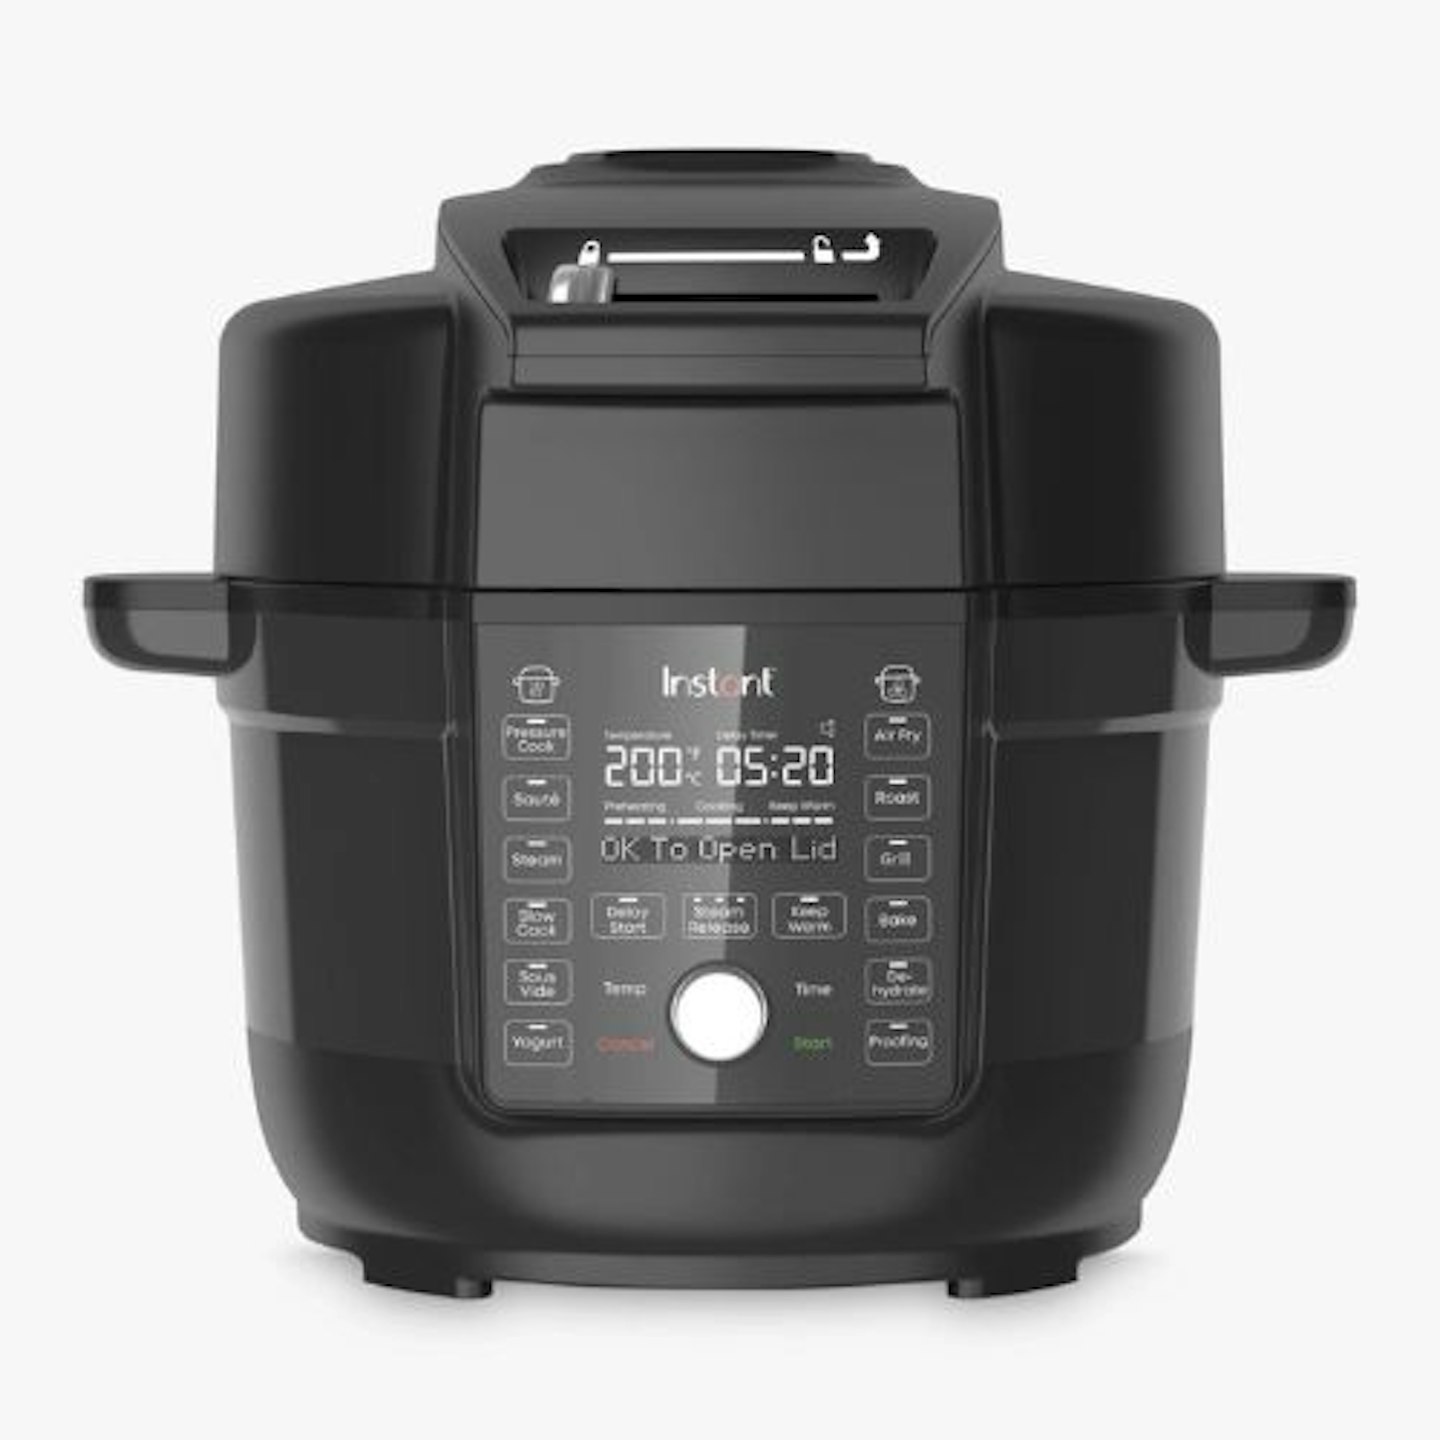 Instant Duo Crisp with Ultimate Lid 13-in-1 Multi-Cooker & Air Fryer, 6.2L, Black